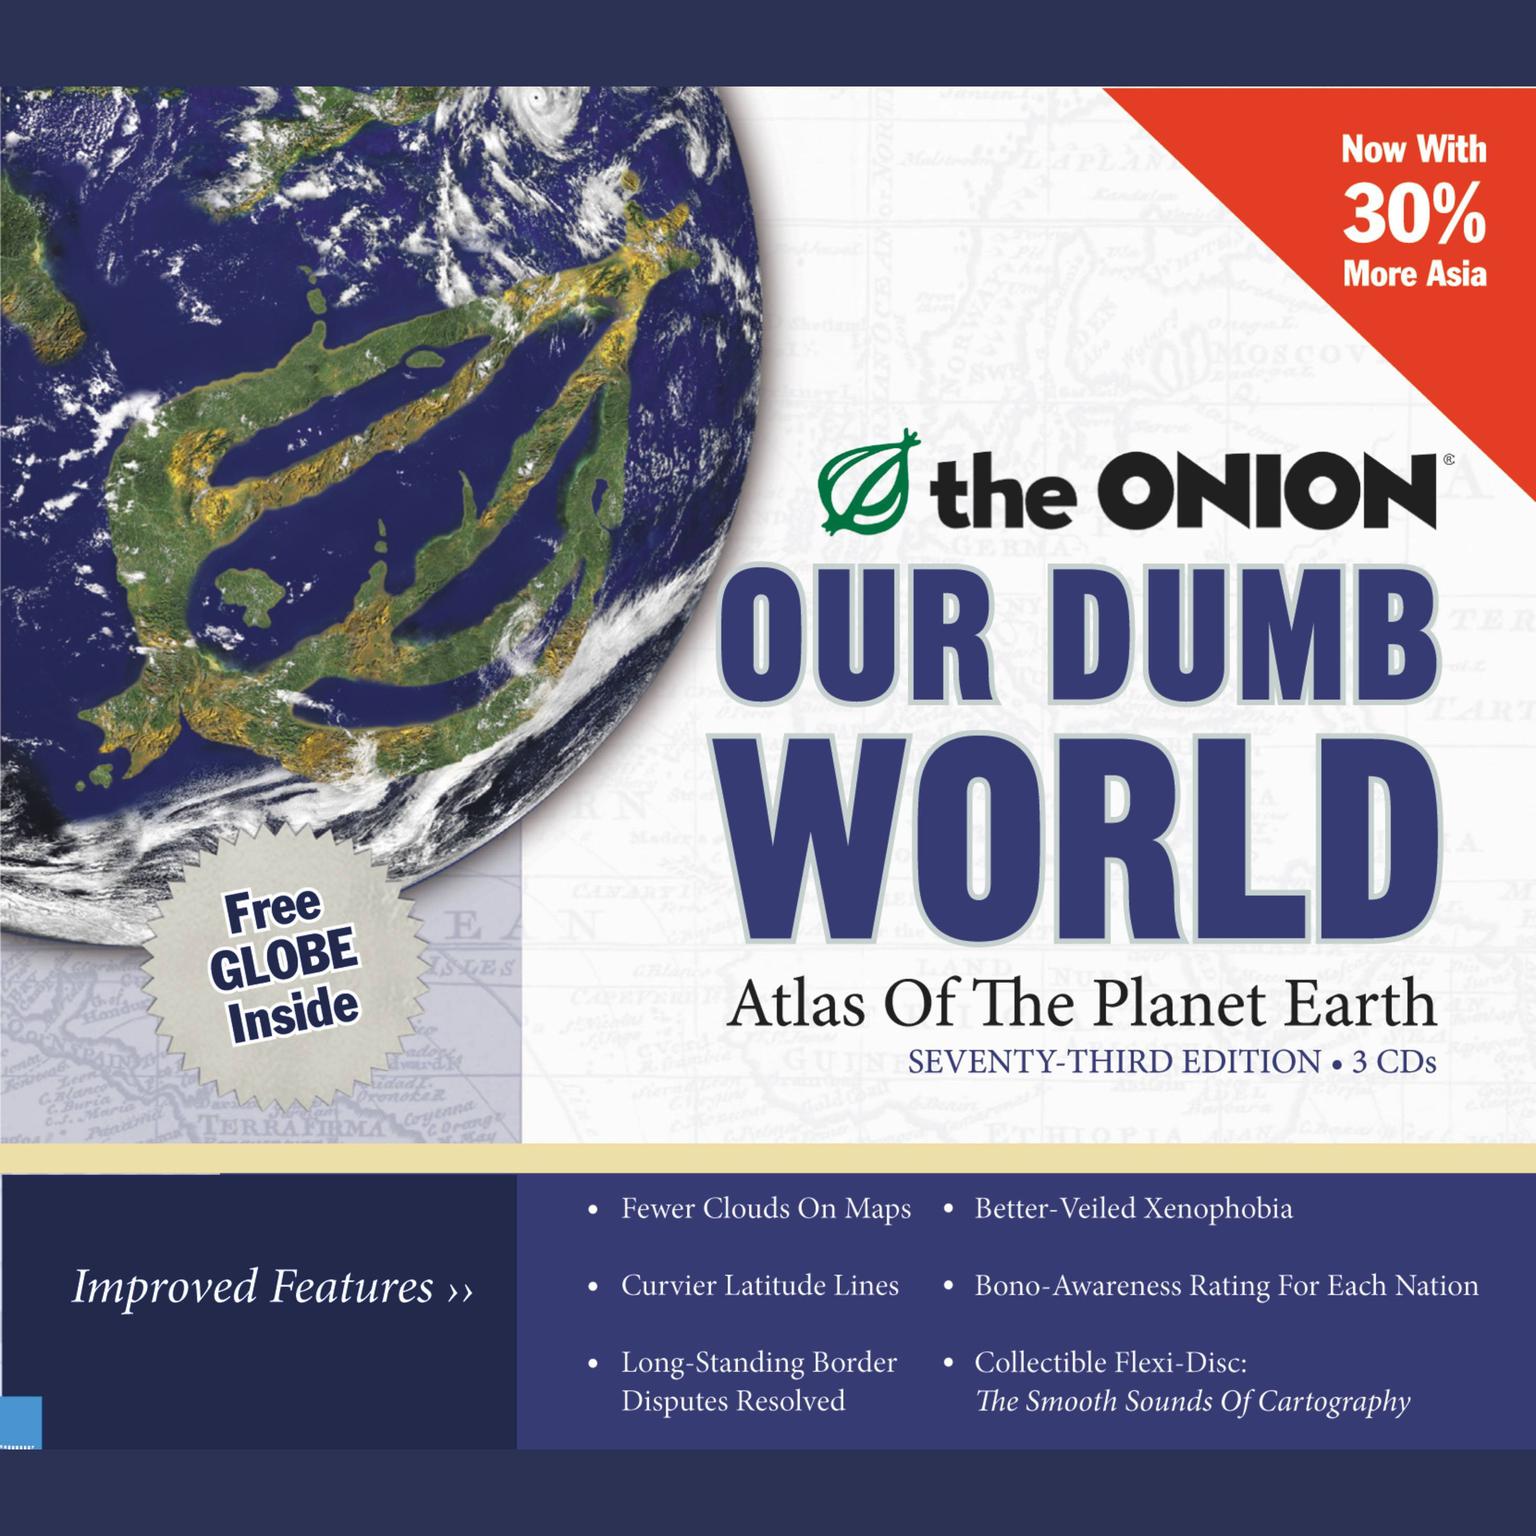 Our Dumb World (Abridged): The Onions Atlas of The Planet Earth, 73rd Edition Audiobook, by The Onion